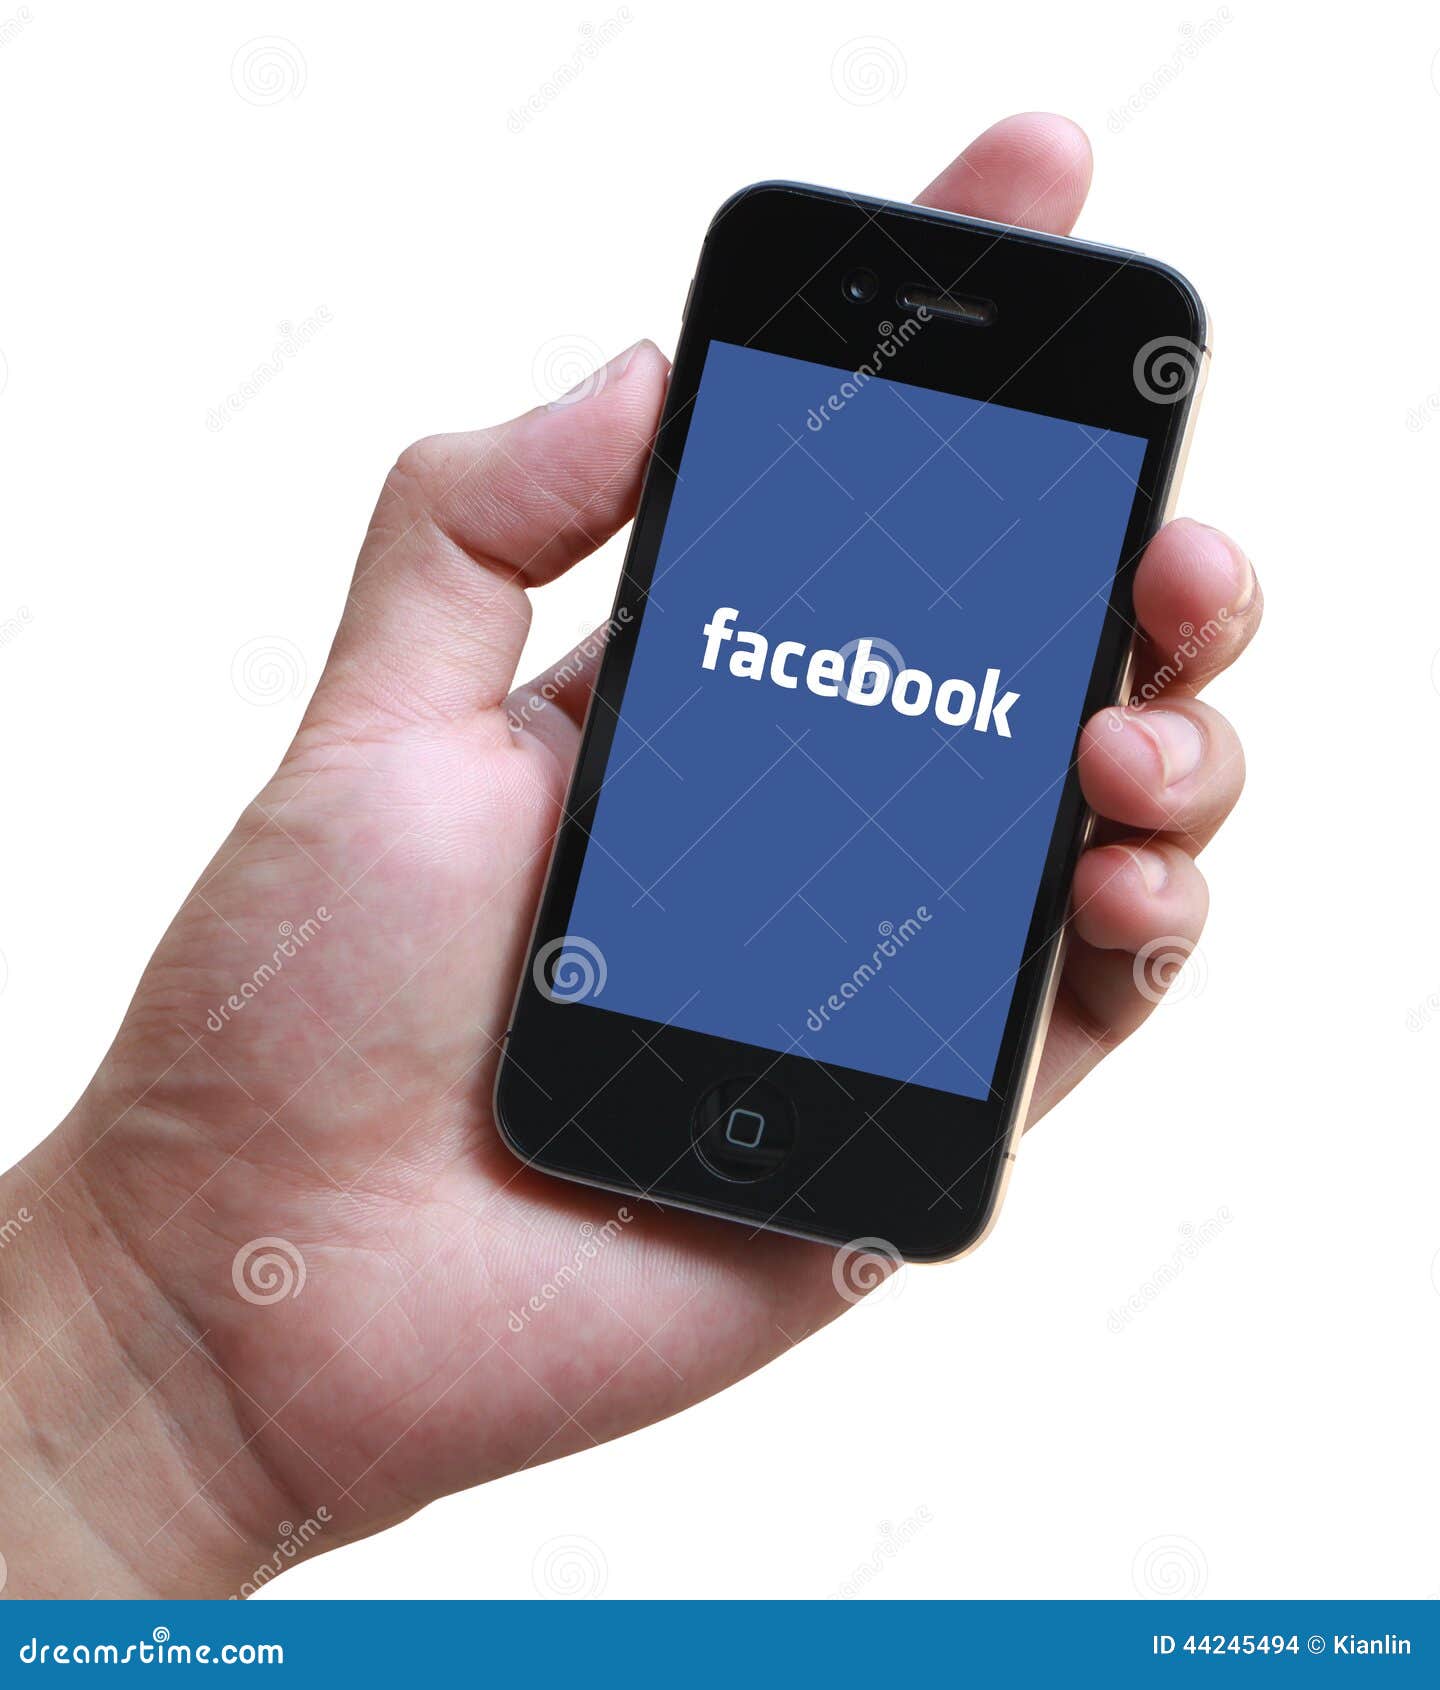 952 Facebook Login Photos Free Royalty Free Stock Photos From Dreamstime